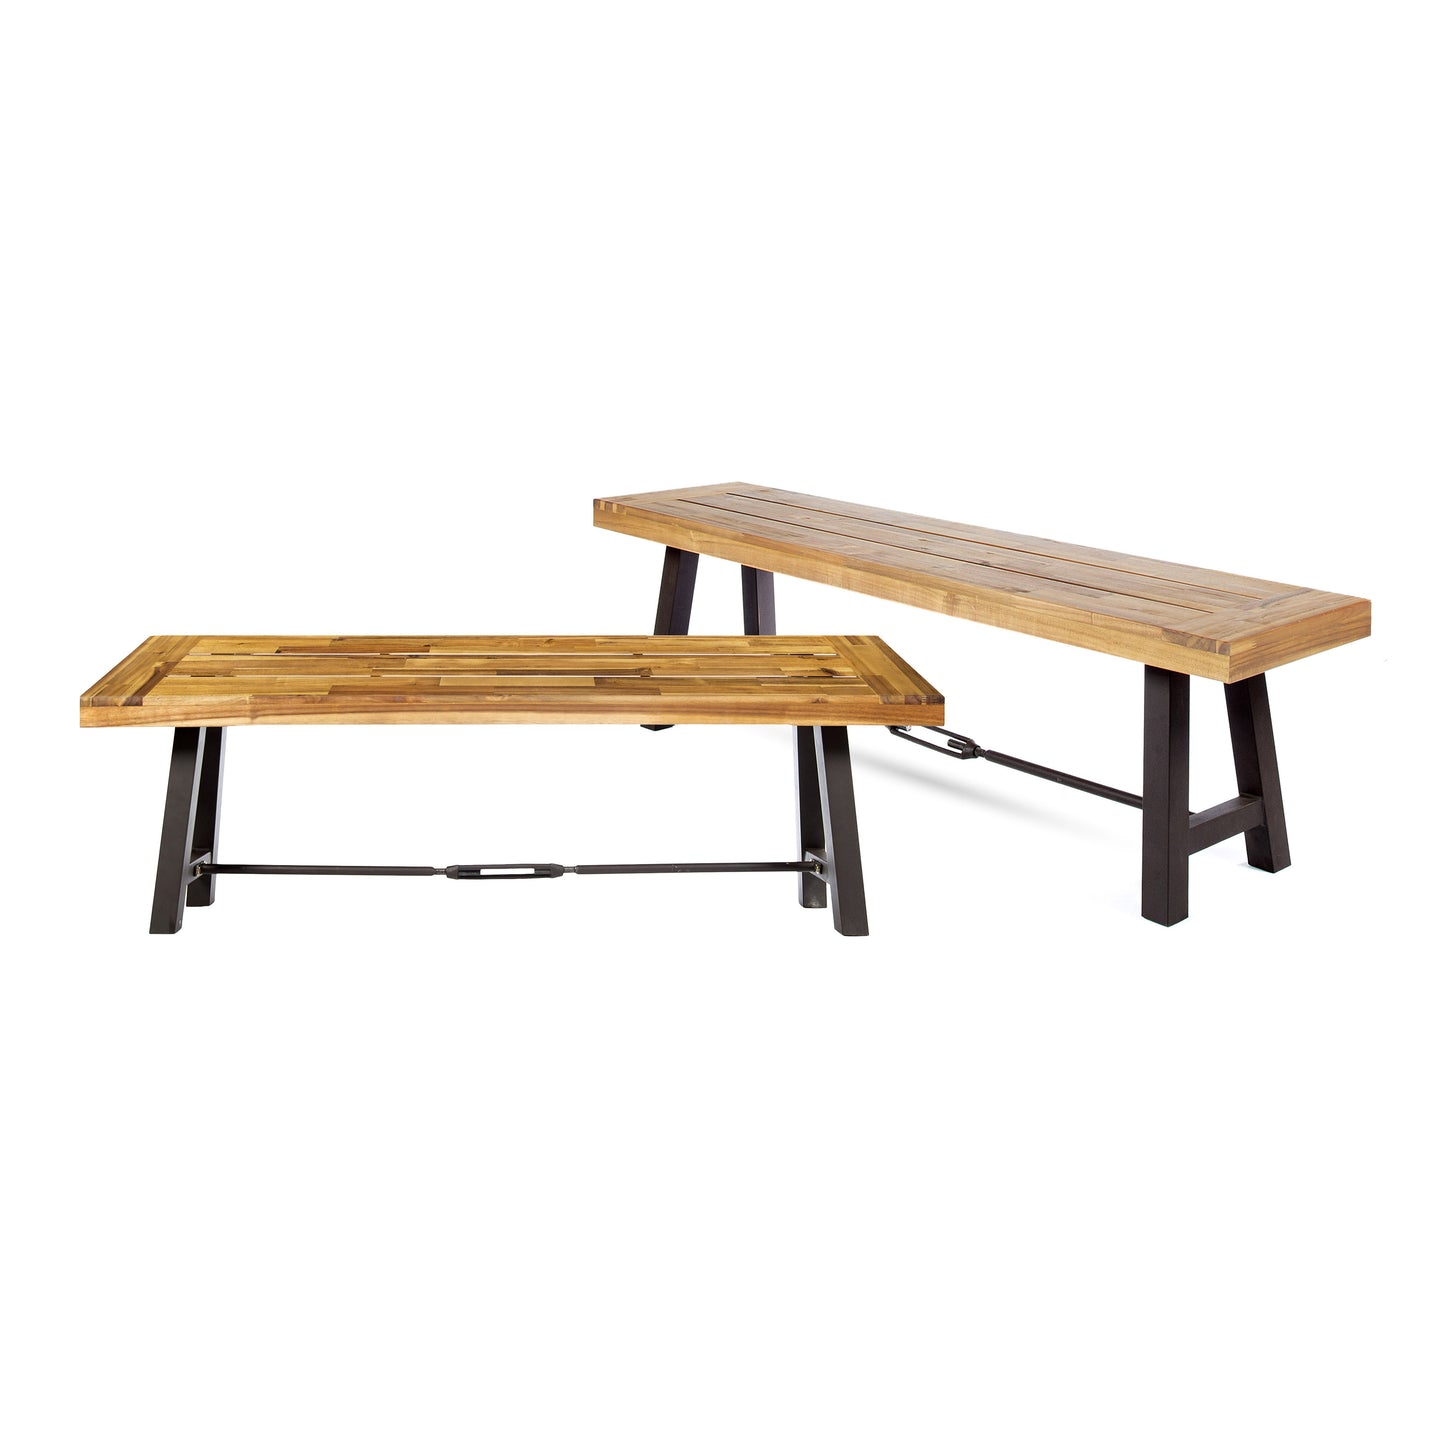 Rosario Outdoor Acacia Wood Dining Benches, Set of 2, Teak and Rustic Metal